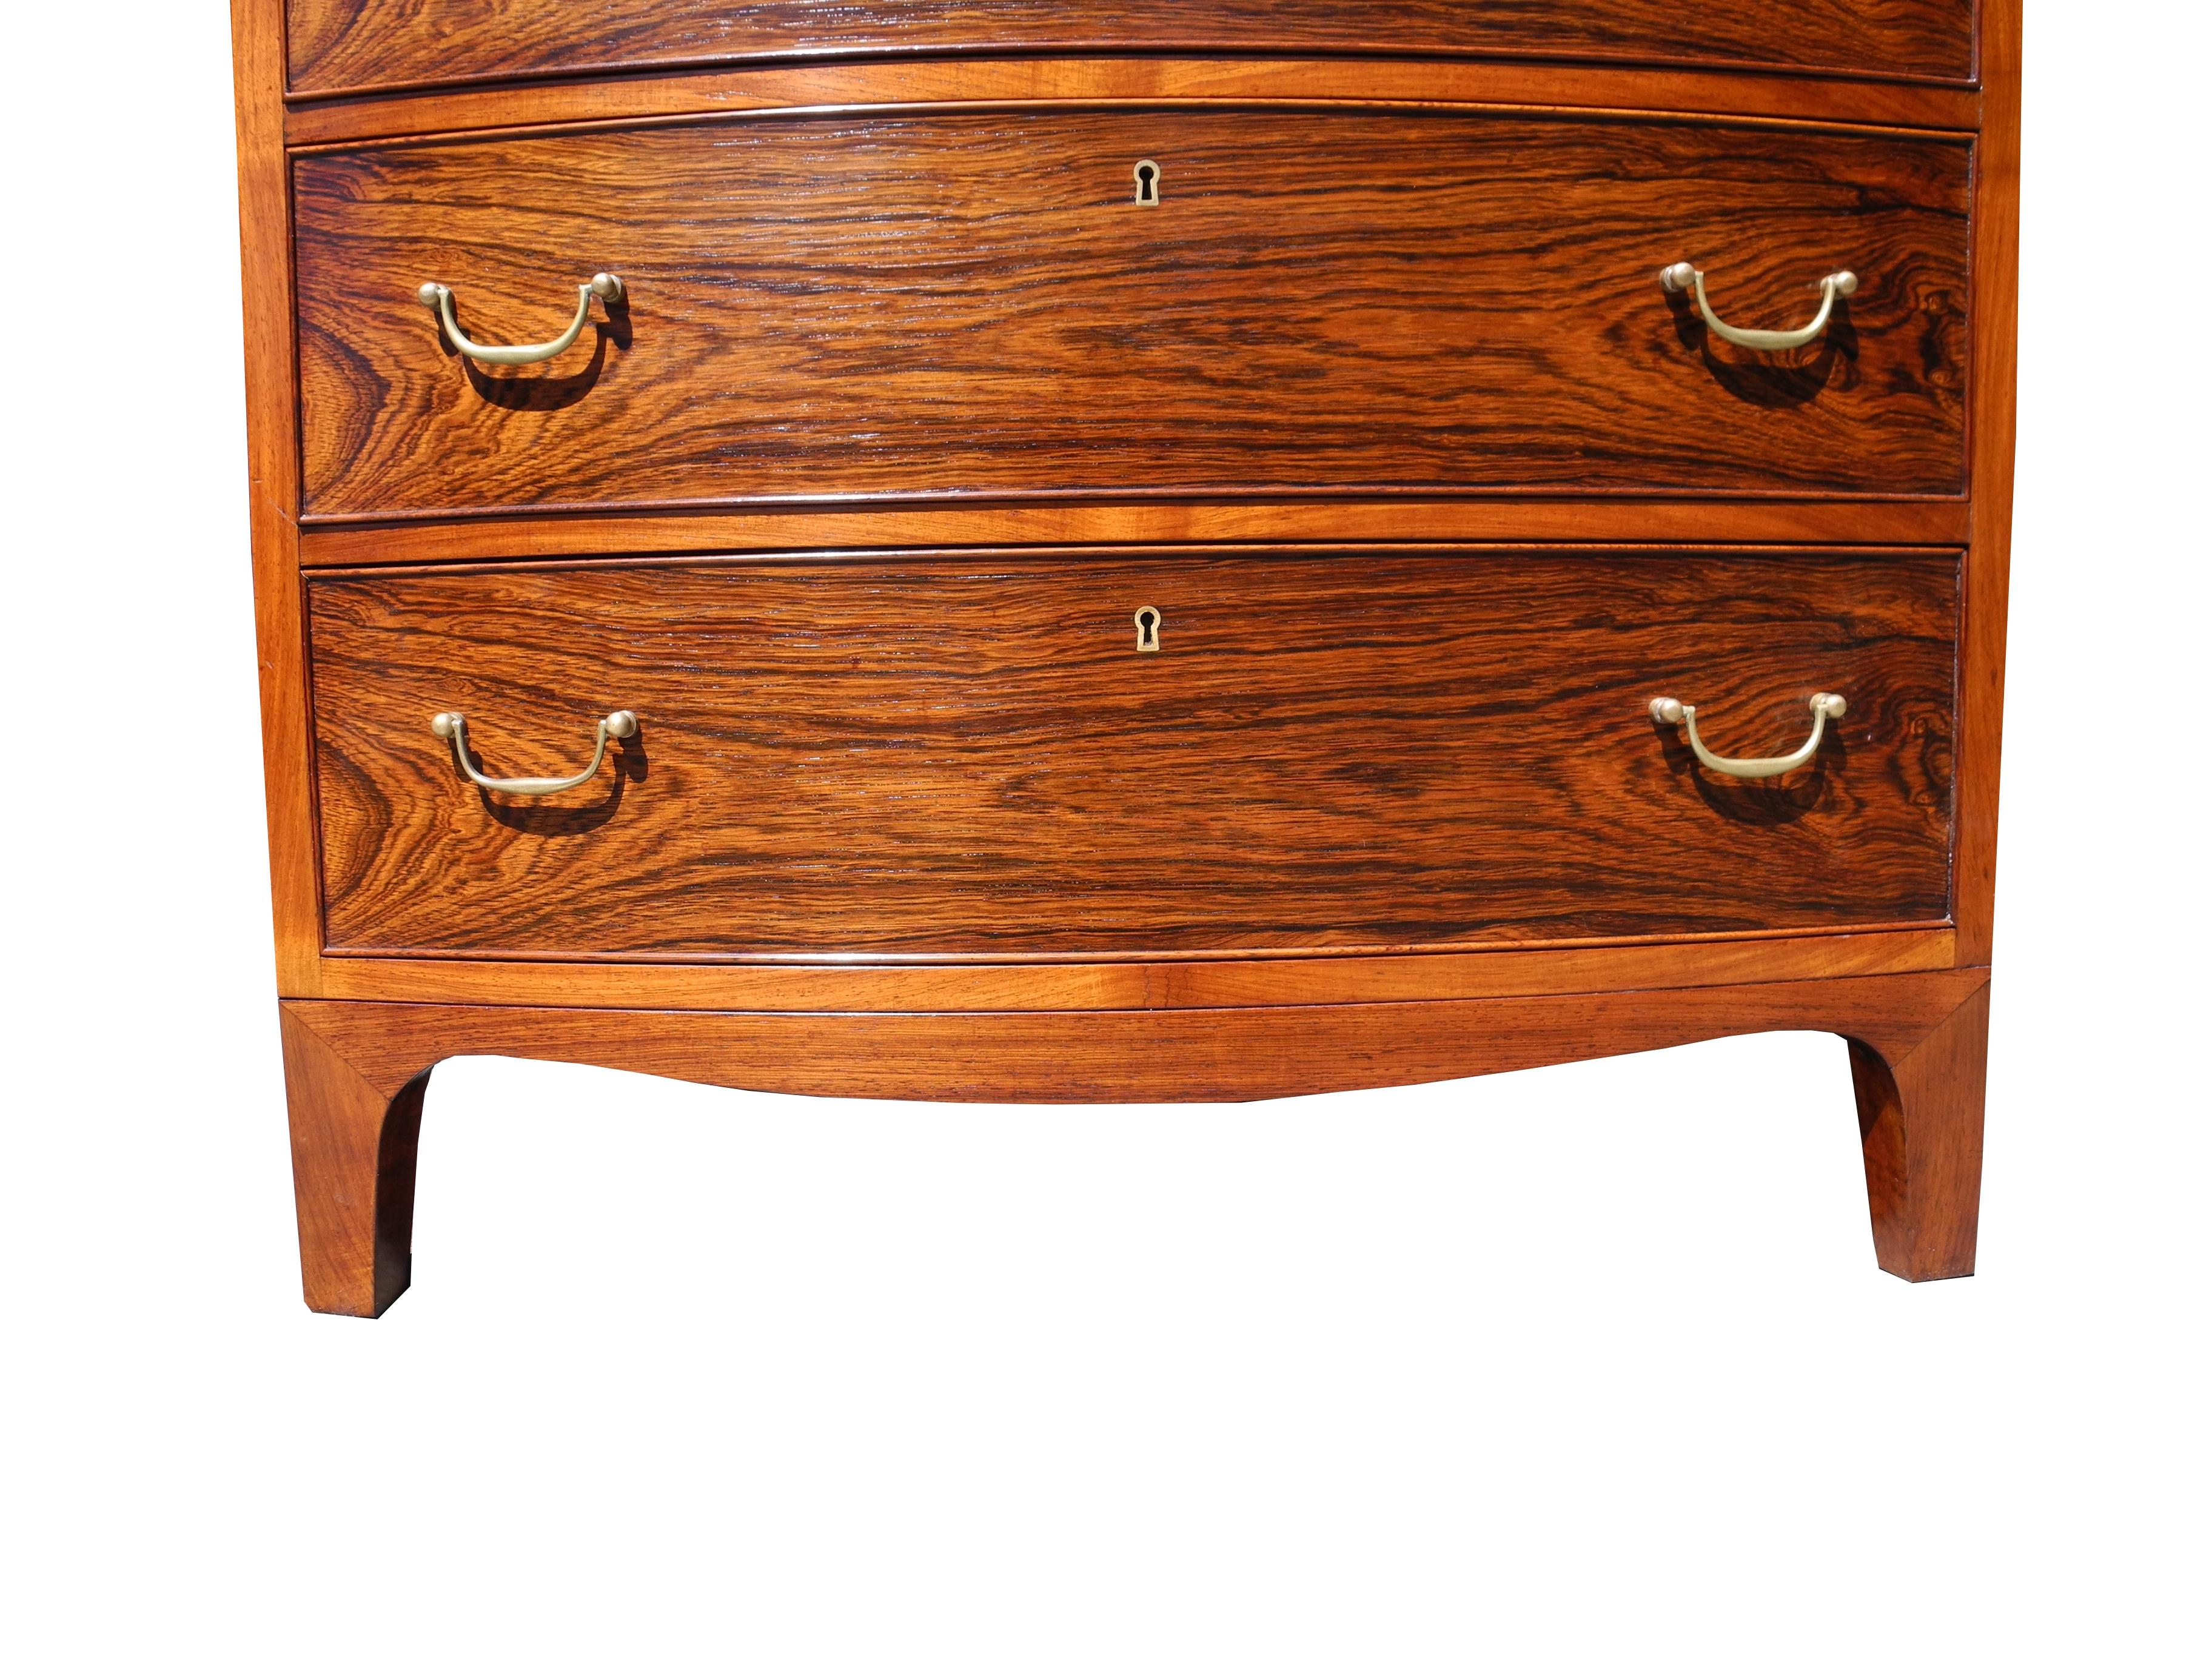 Scandinavian Modern Danish Modern Tall Rosewood Bombe Dresser or Chest of Drawers by Ole Wanscher For Sale